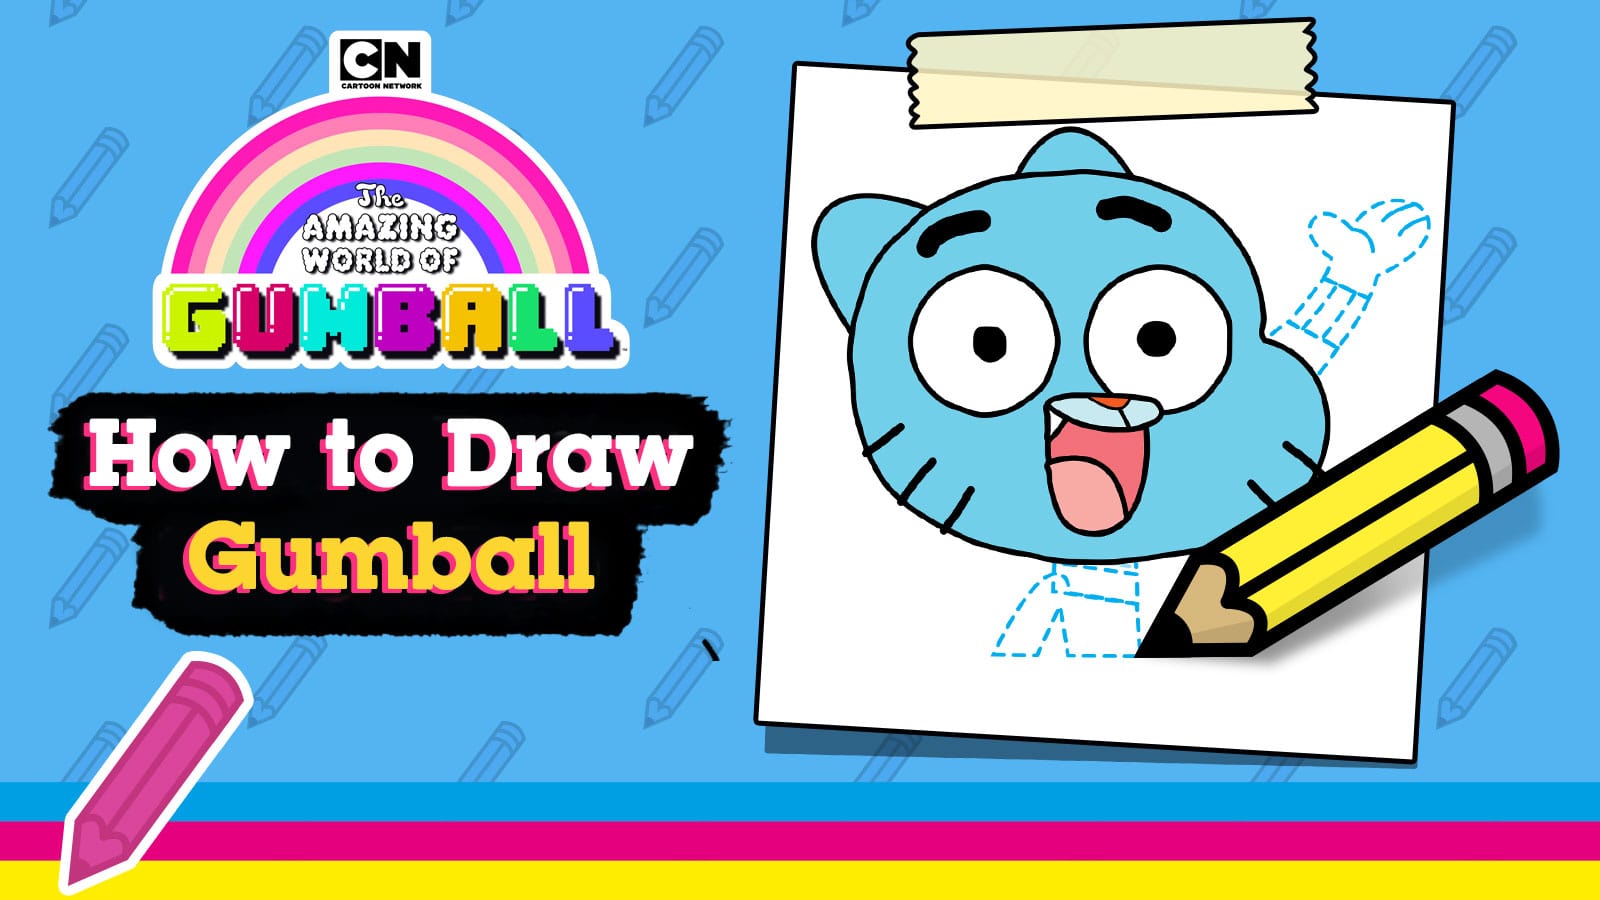 How to Draw | The Amazing World of Gumball | Cartoon Network